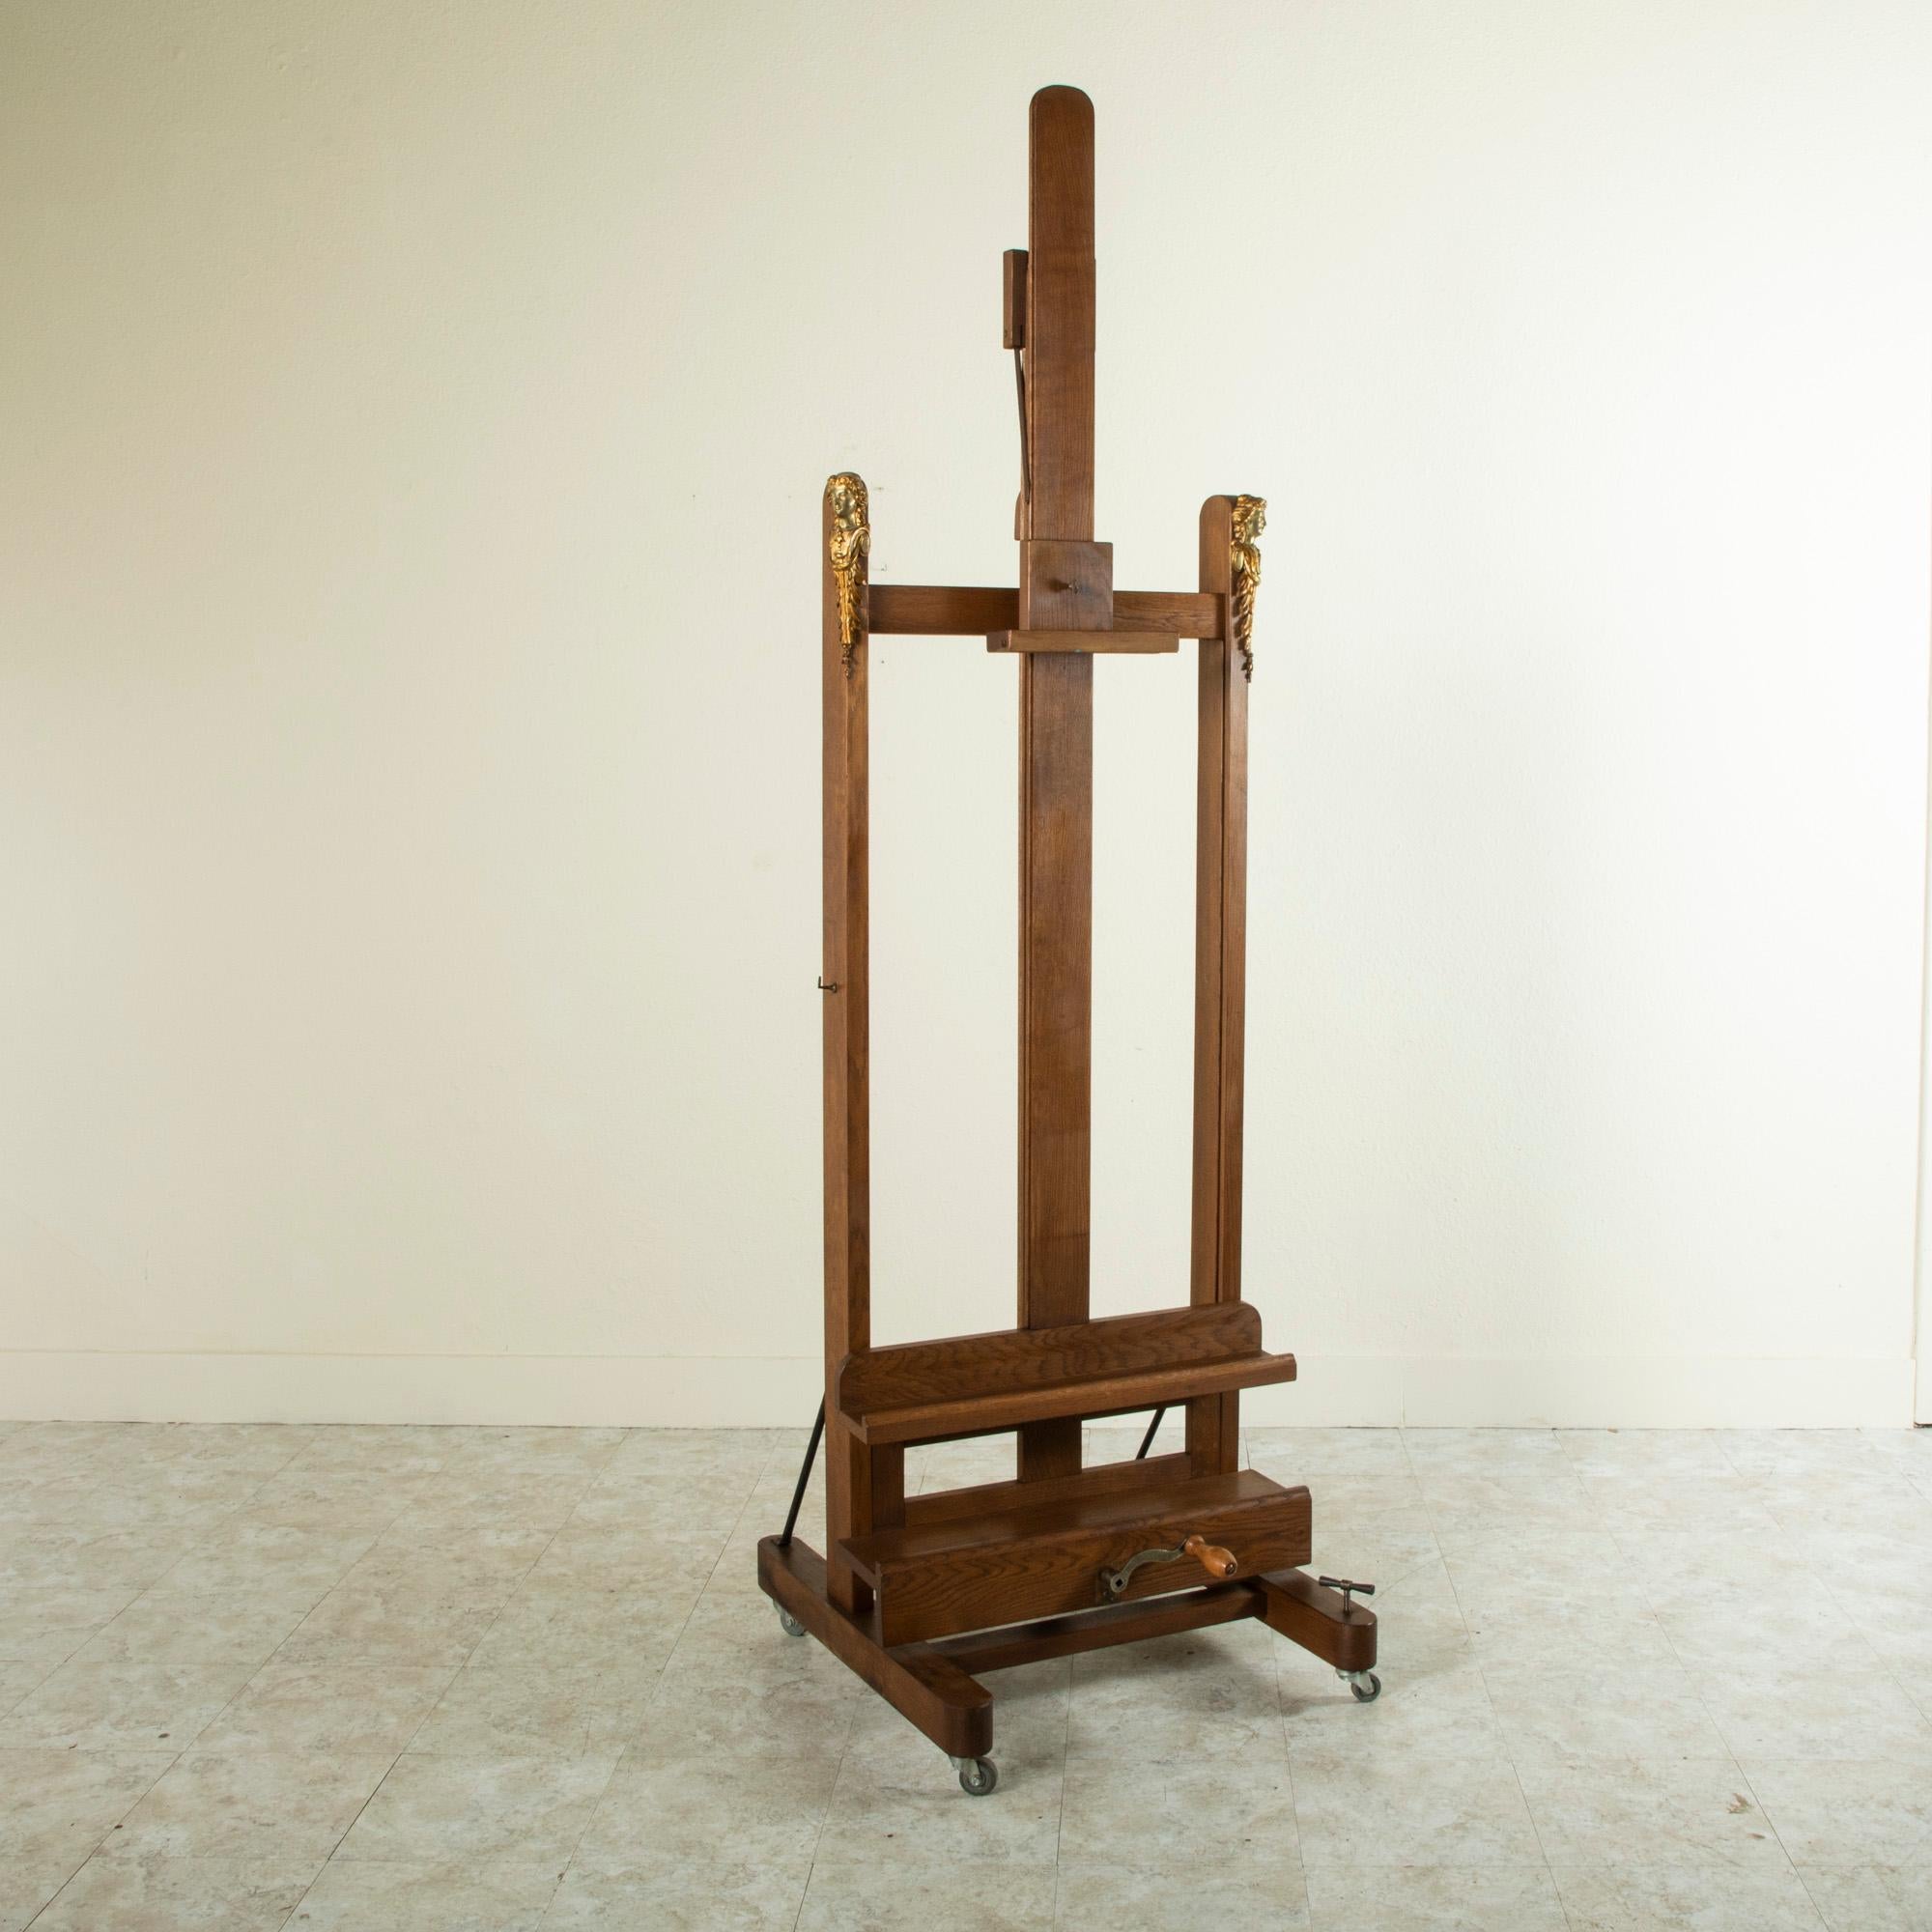 This very large oak floor easel from the late 19th century was originally used in a French gallery for exhibiting art and is detailed with bronze plaques of female masques on the upper corners. An extraordinary find, this easel features a double